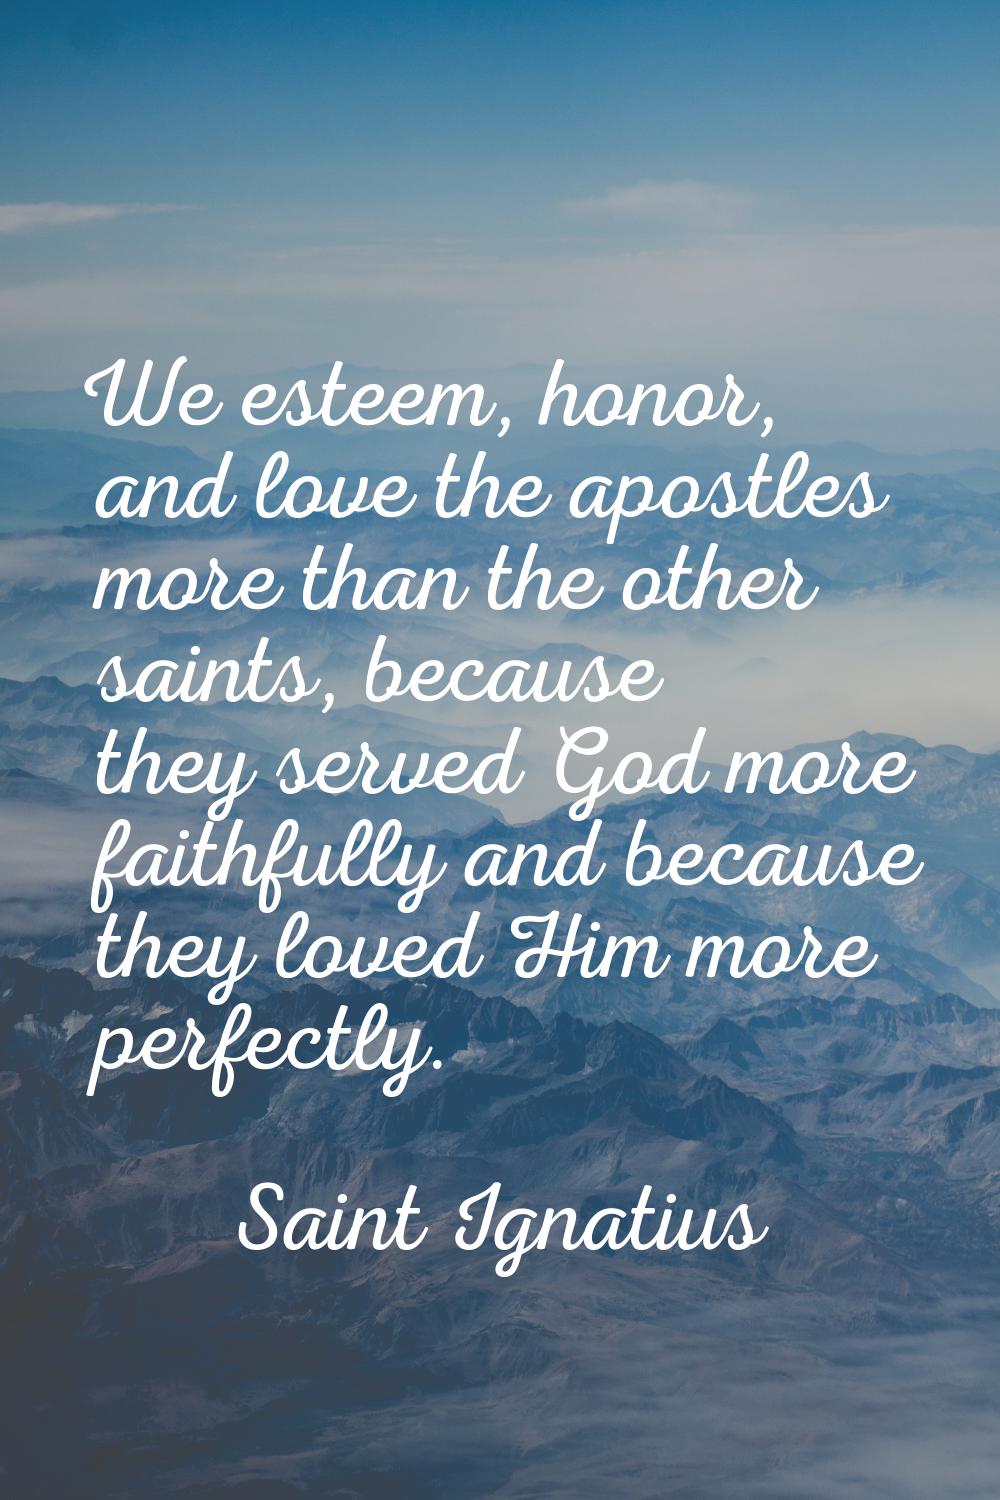 We esteem, honor, and love the apostles more than the other saints, because they served God more fa